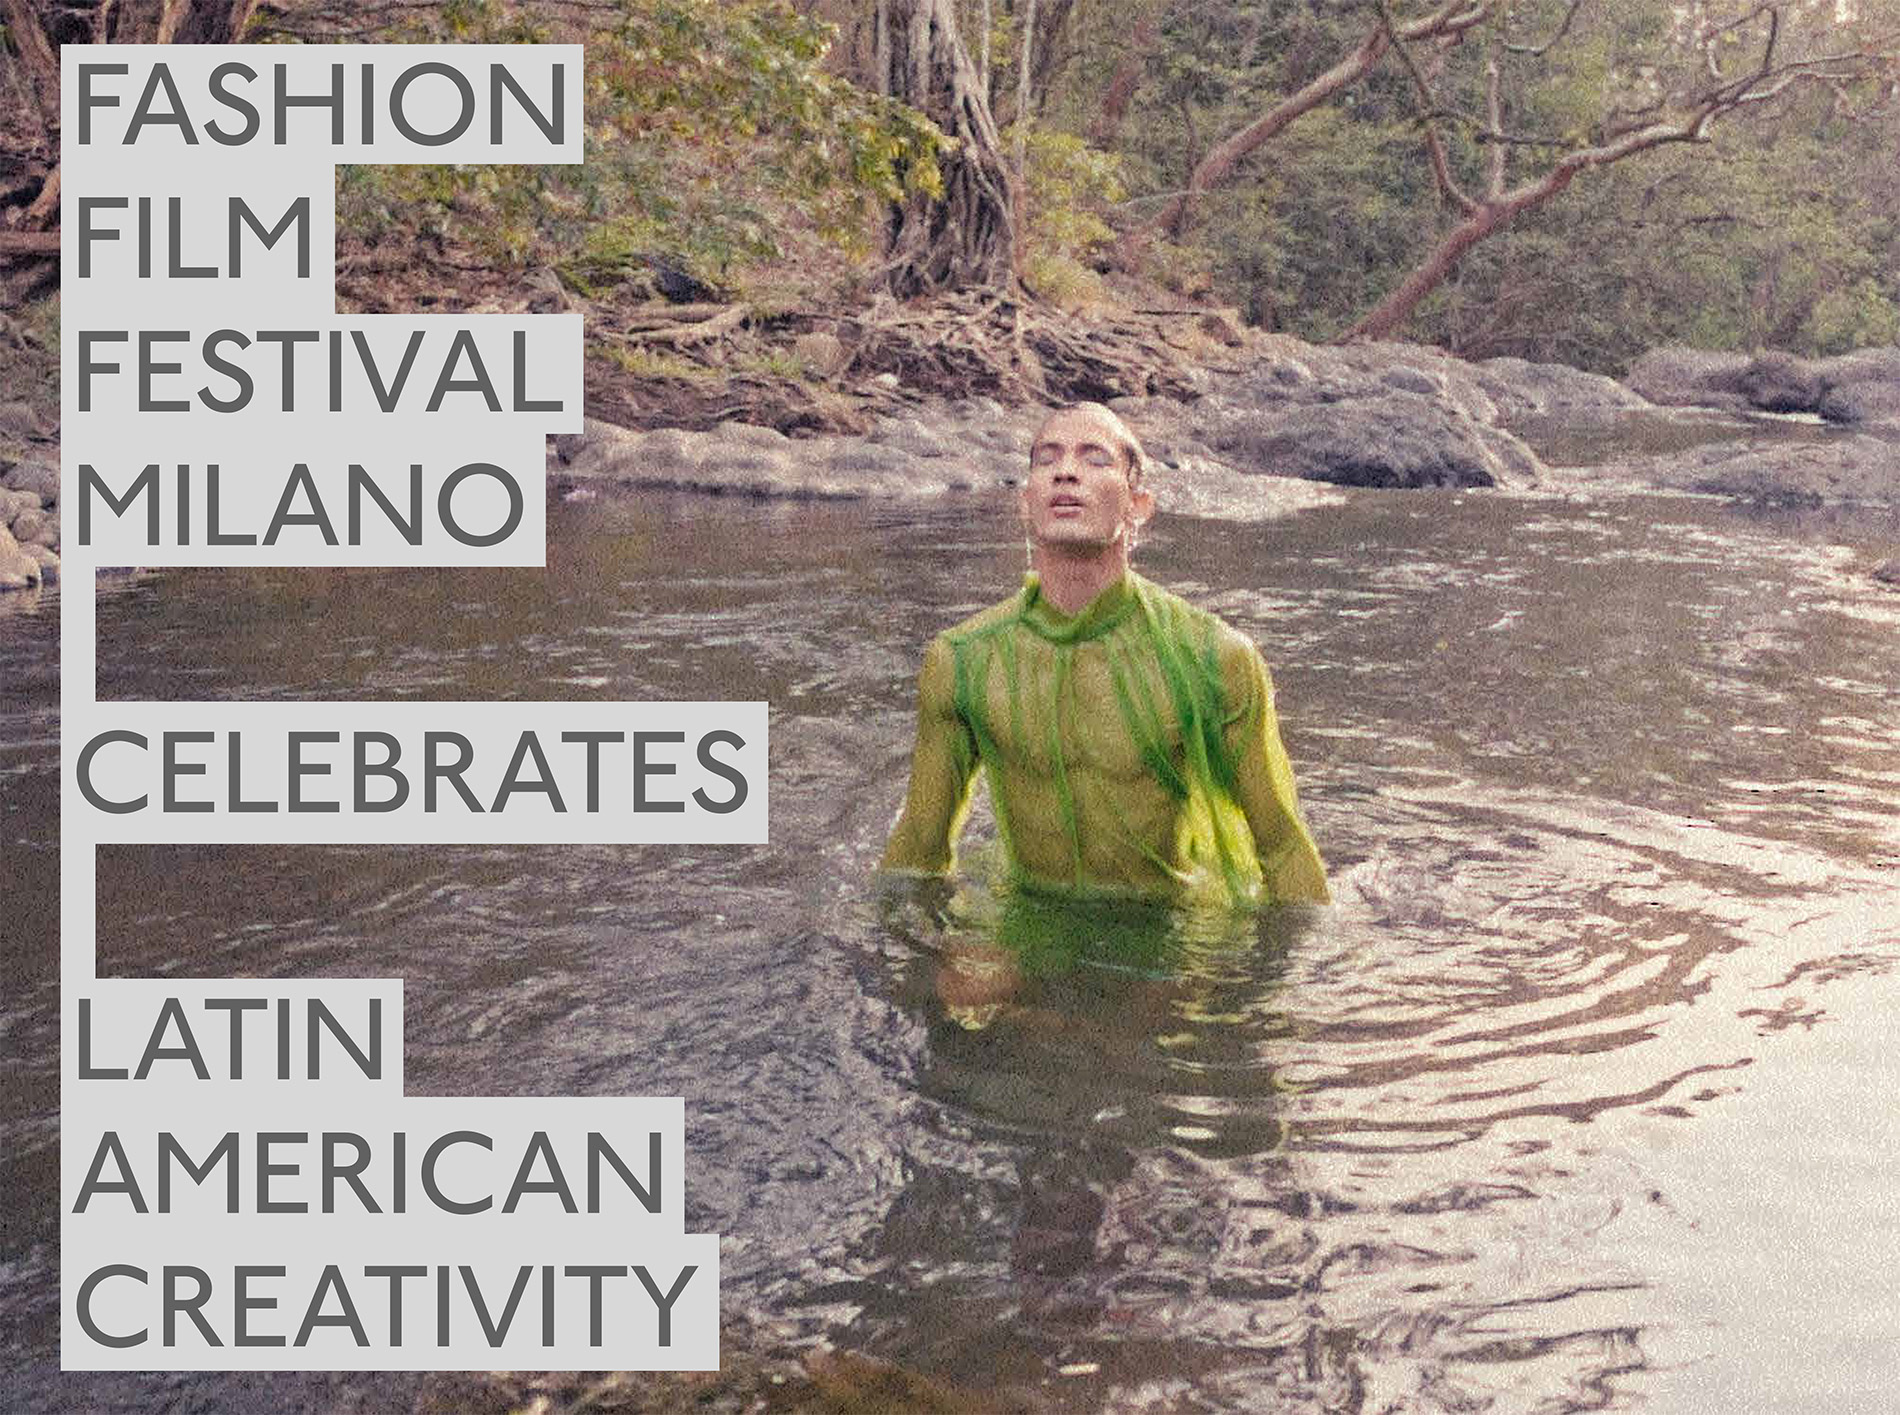 Man wearing green mesh top swimming in a lake with the words "Fashion Film Festival Milano celebrates Latin American creativity"